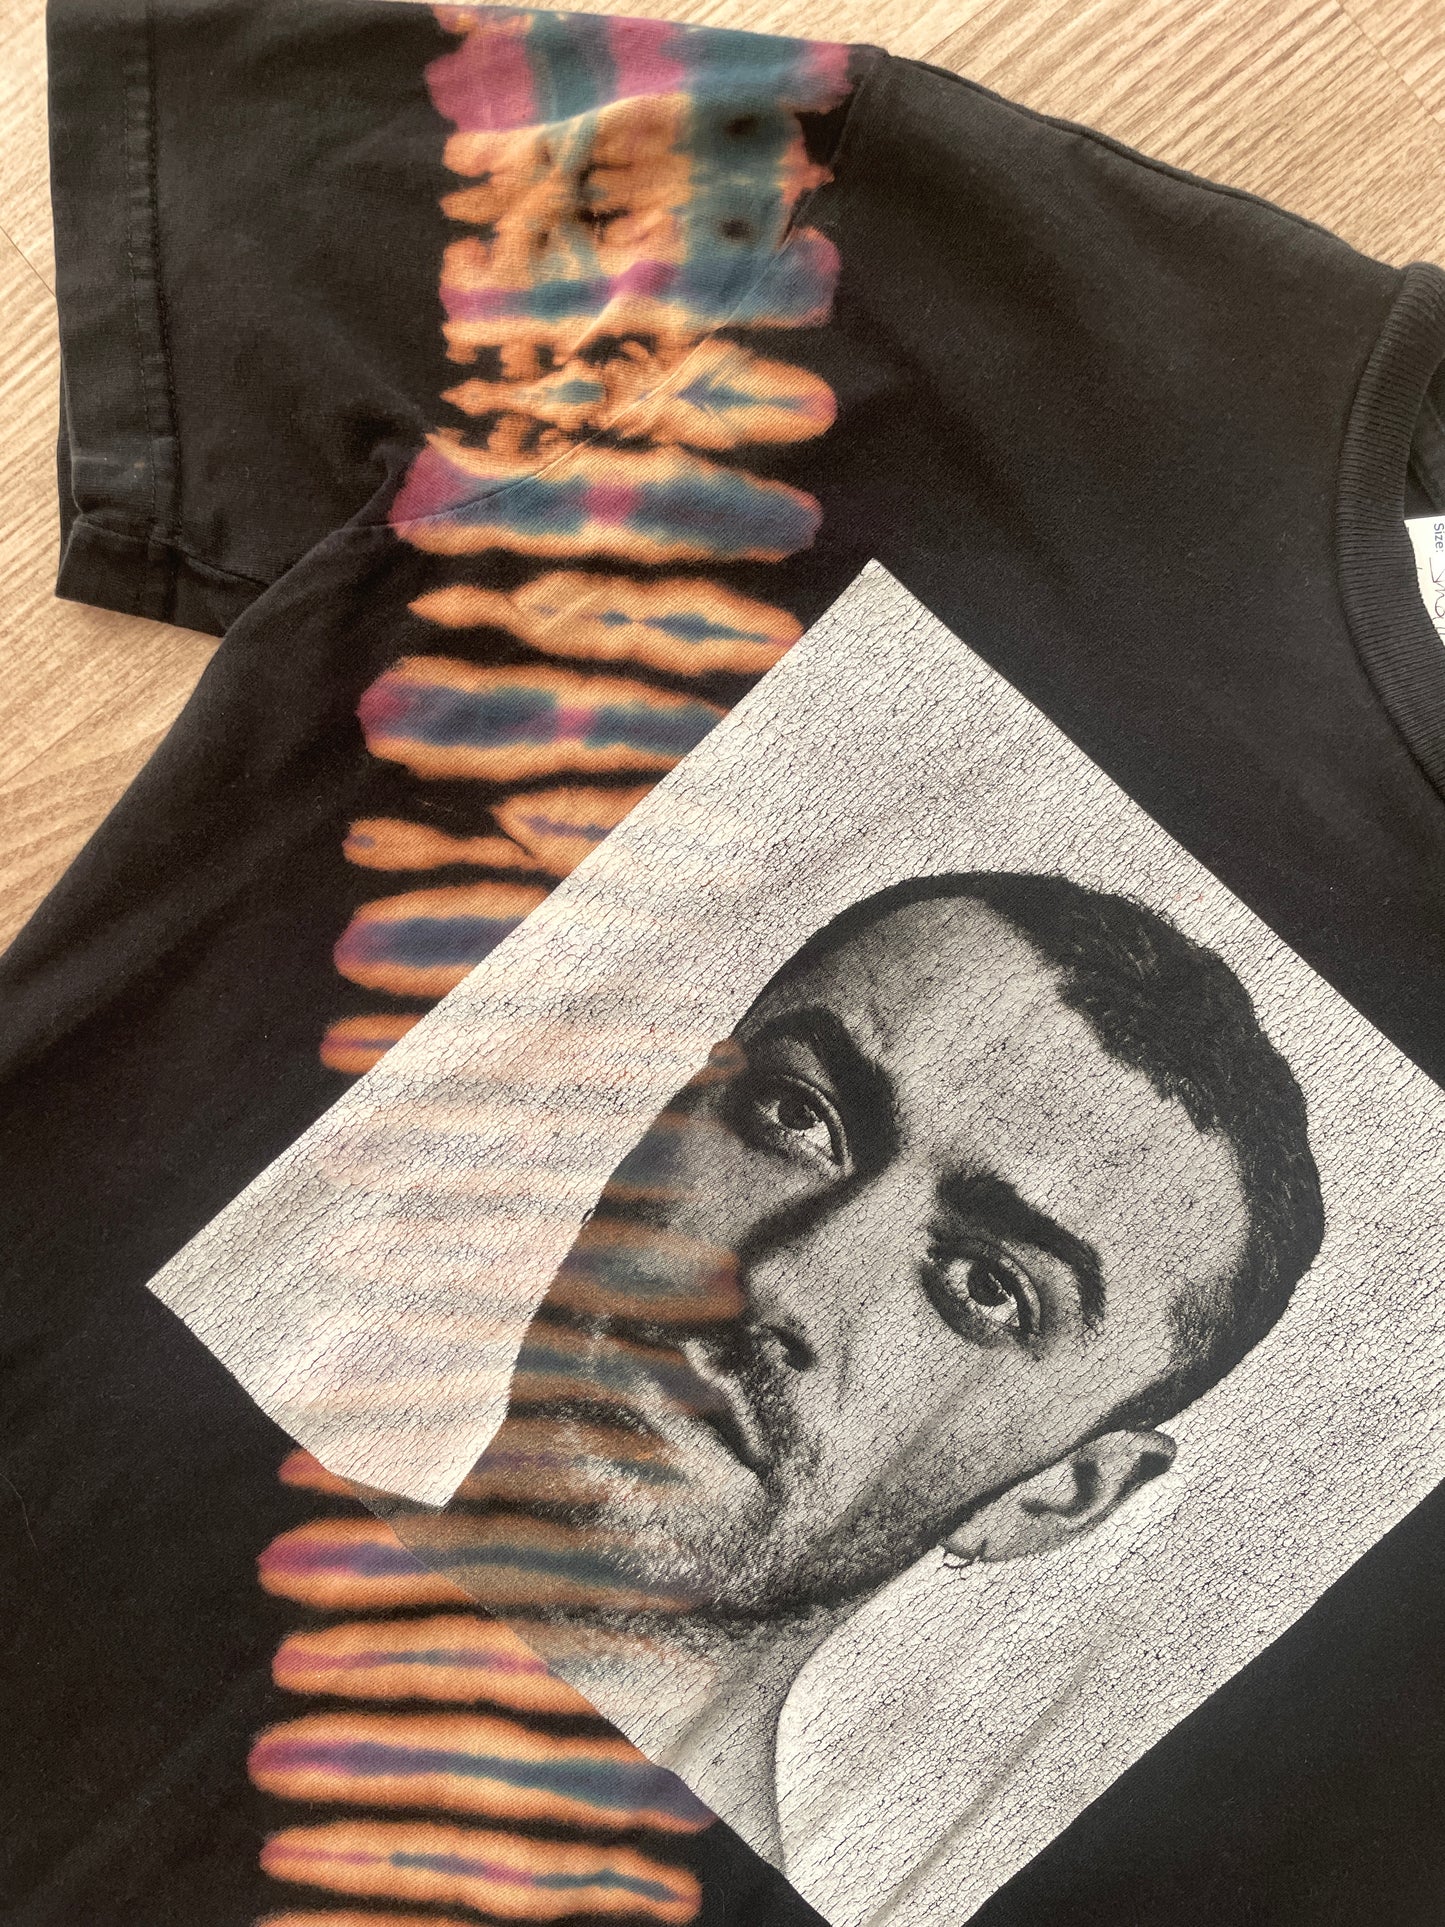 SMALL Men's Sam Smith Handmade Reverse Tie Dye Short Sleeve T-Shirt | One-Of-a-Kind Upcycled Black, Blue, and Purple Pleated Top